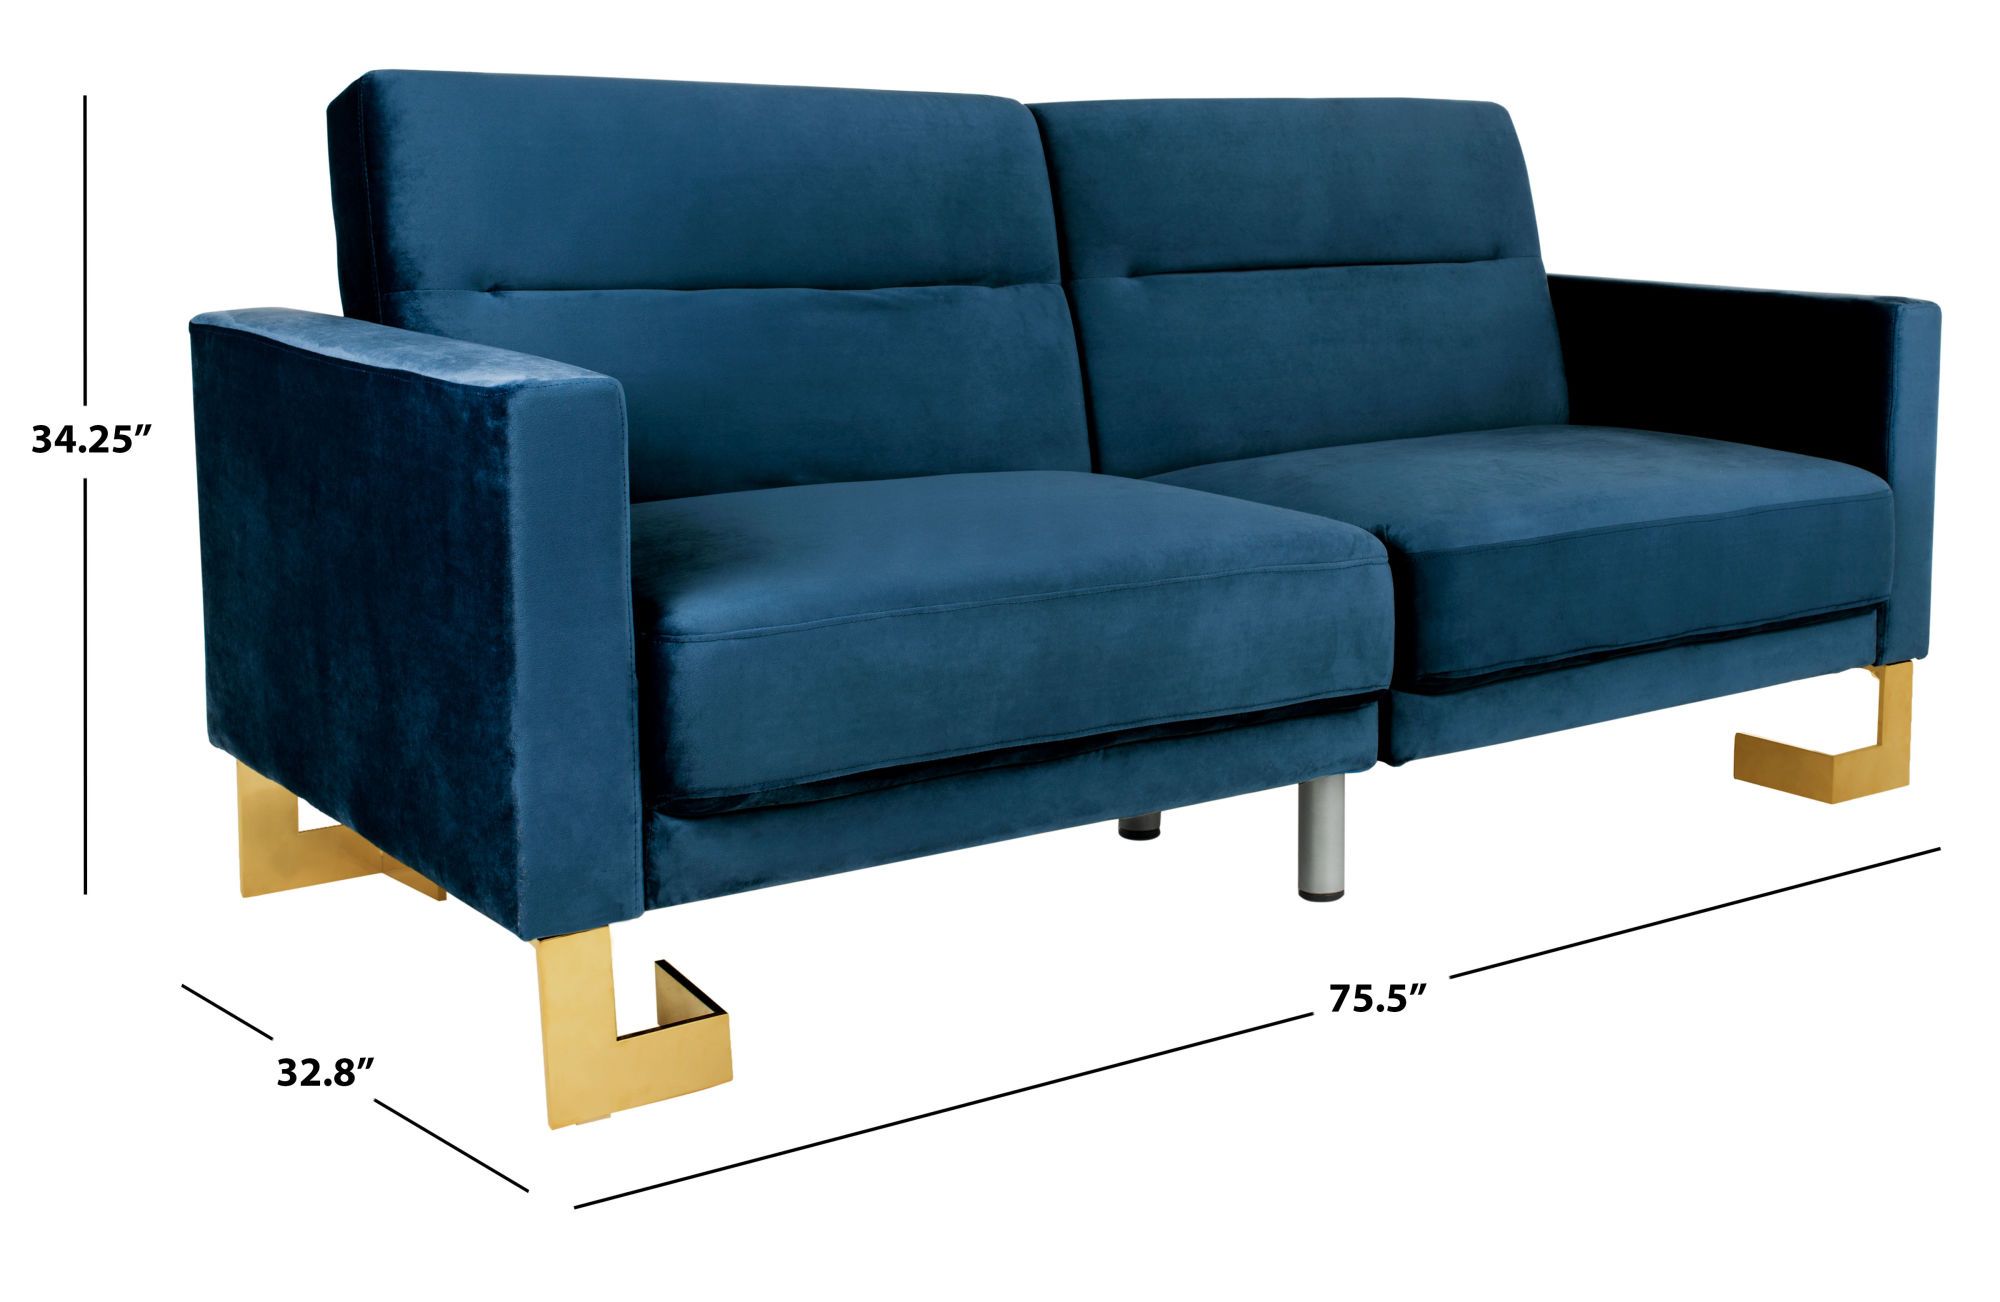 Tribeca Foldable Sofa Bed In Navy/brasssafavieh Within 2 In 1 Foldable Sofas (View 20 of 20)